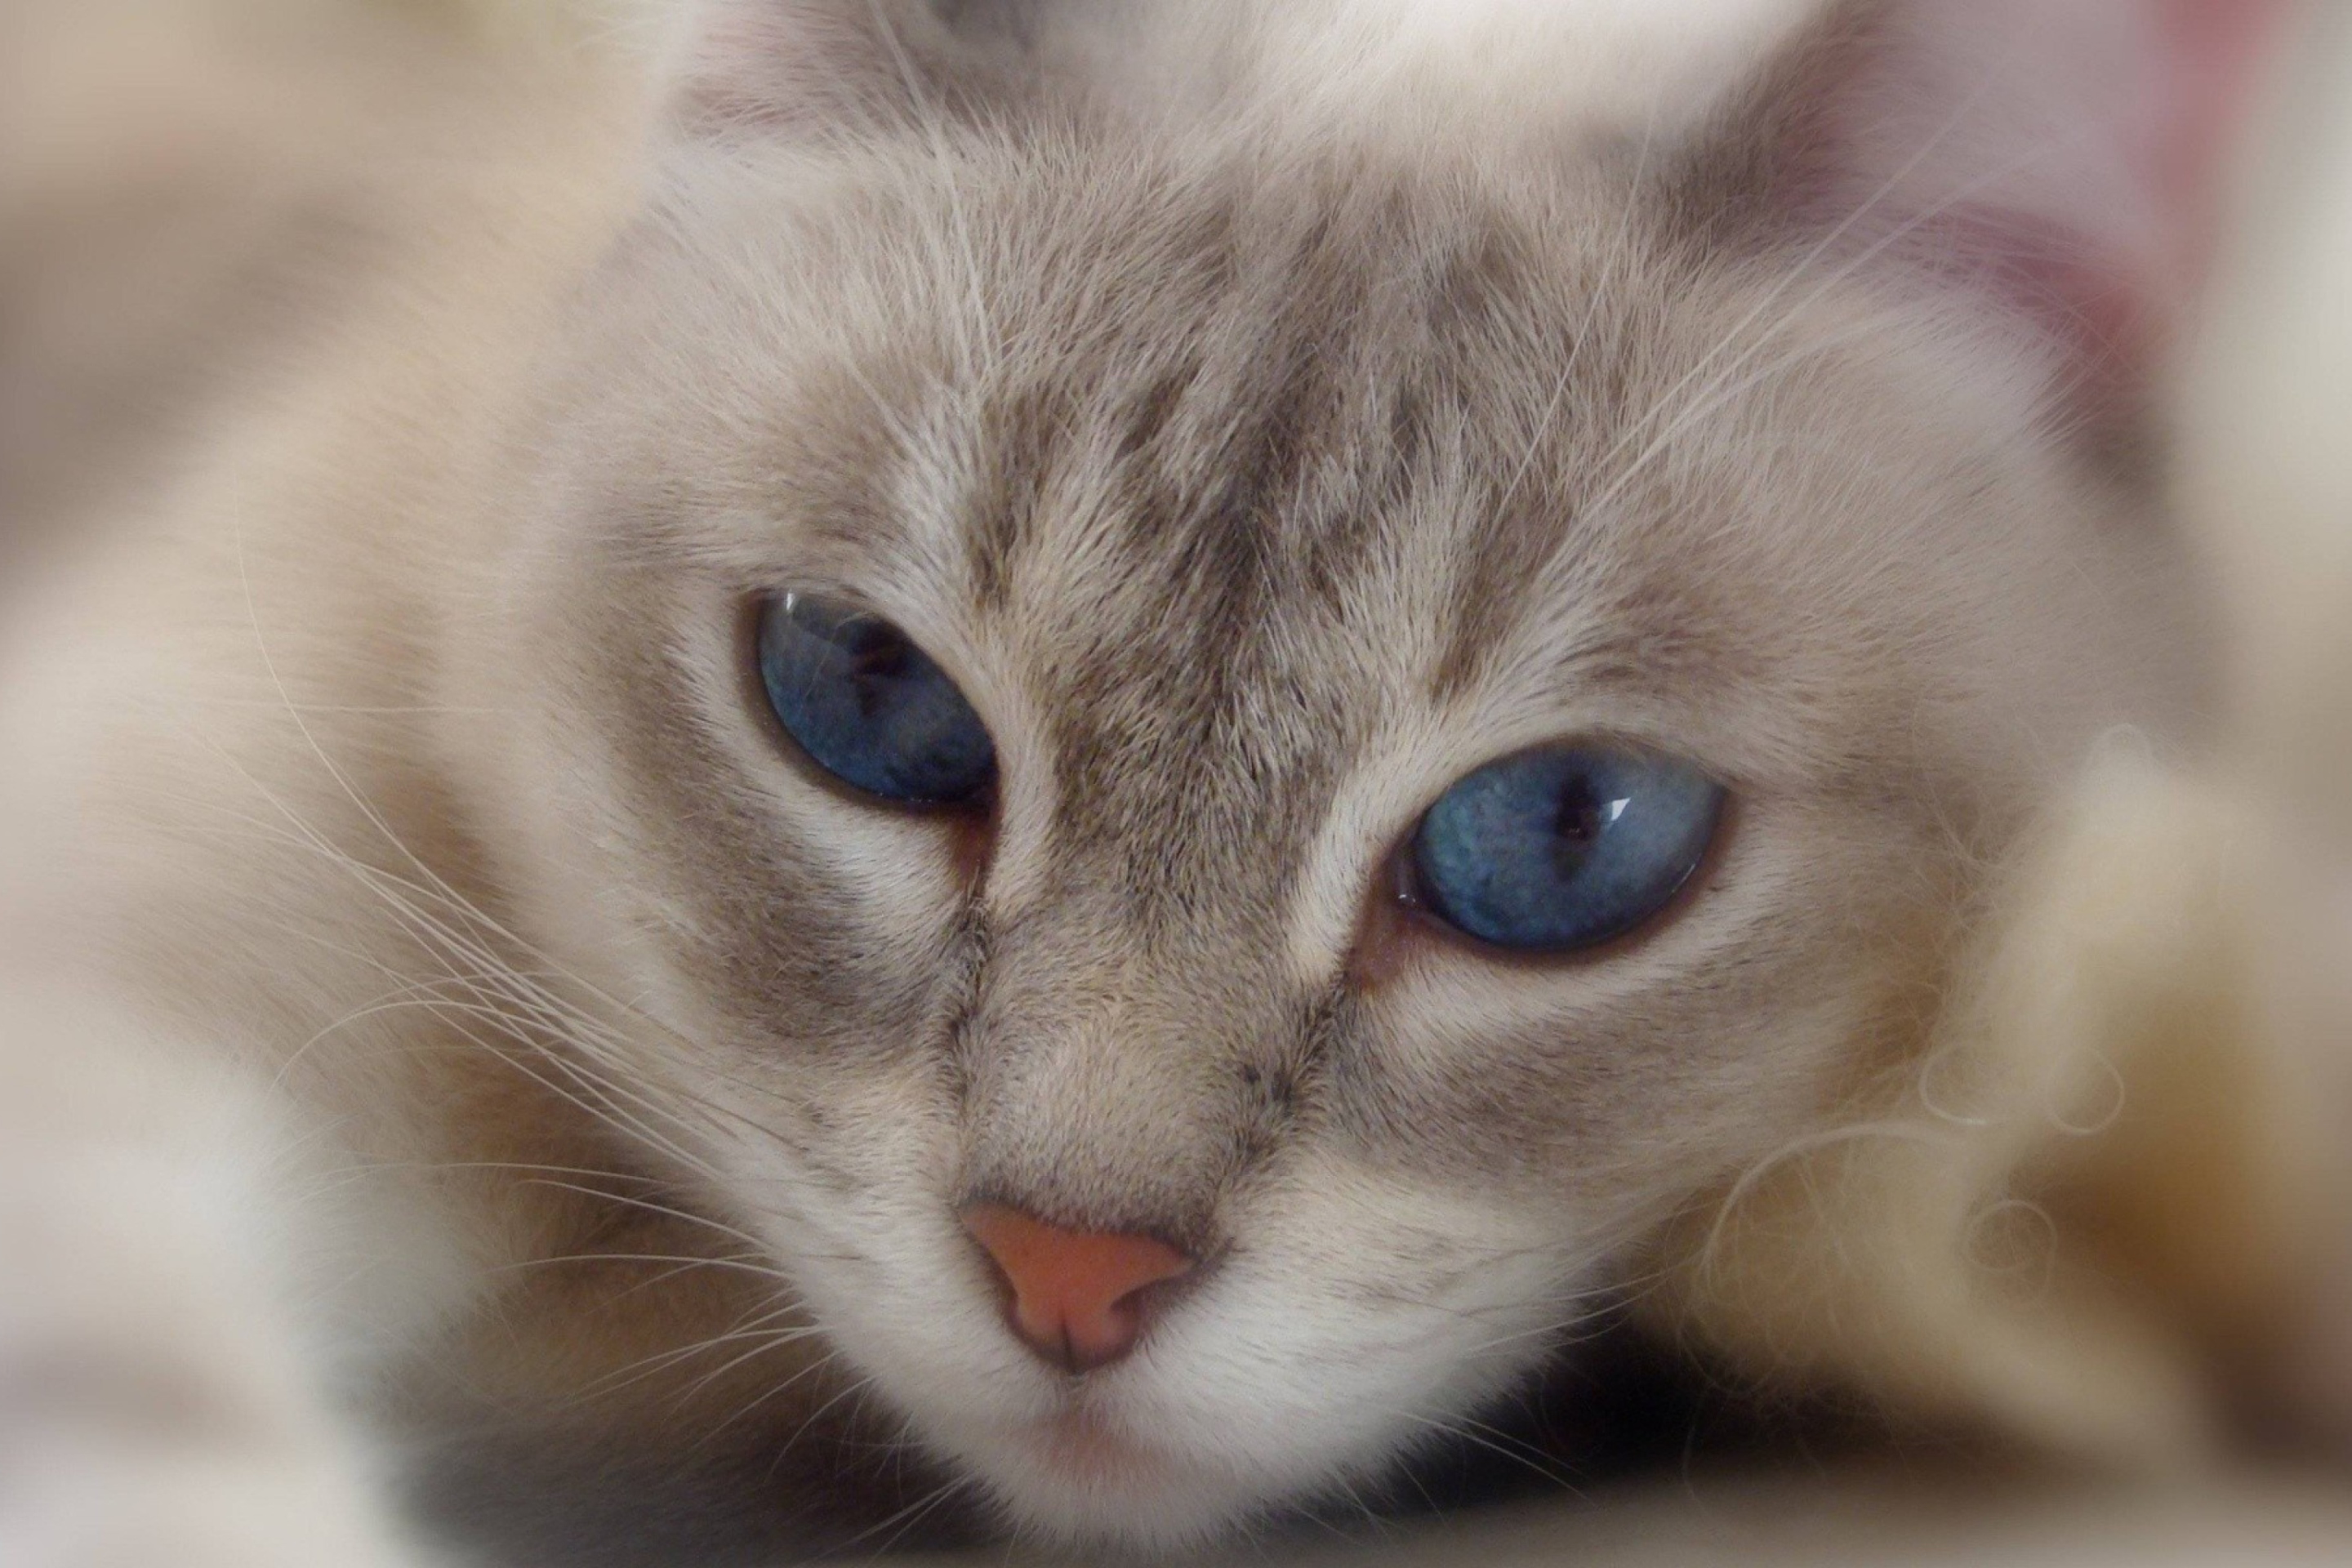 Cat With Blue Eyes wallpaper 2880x1920